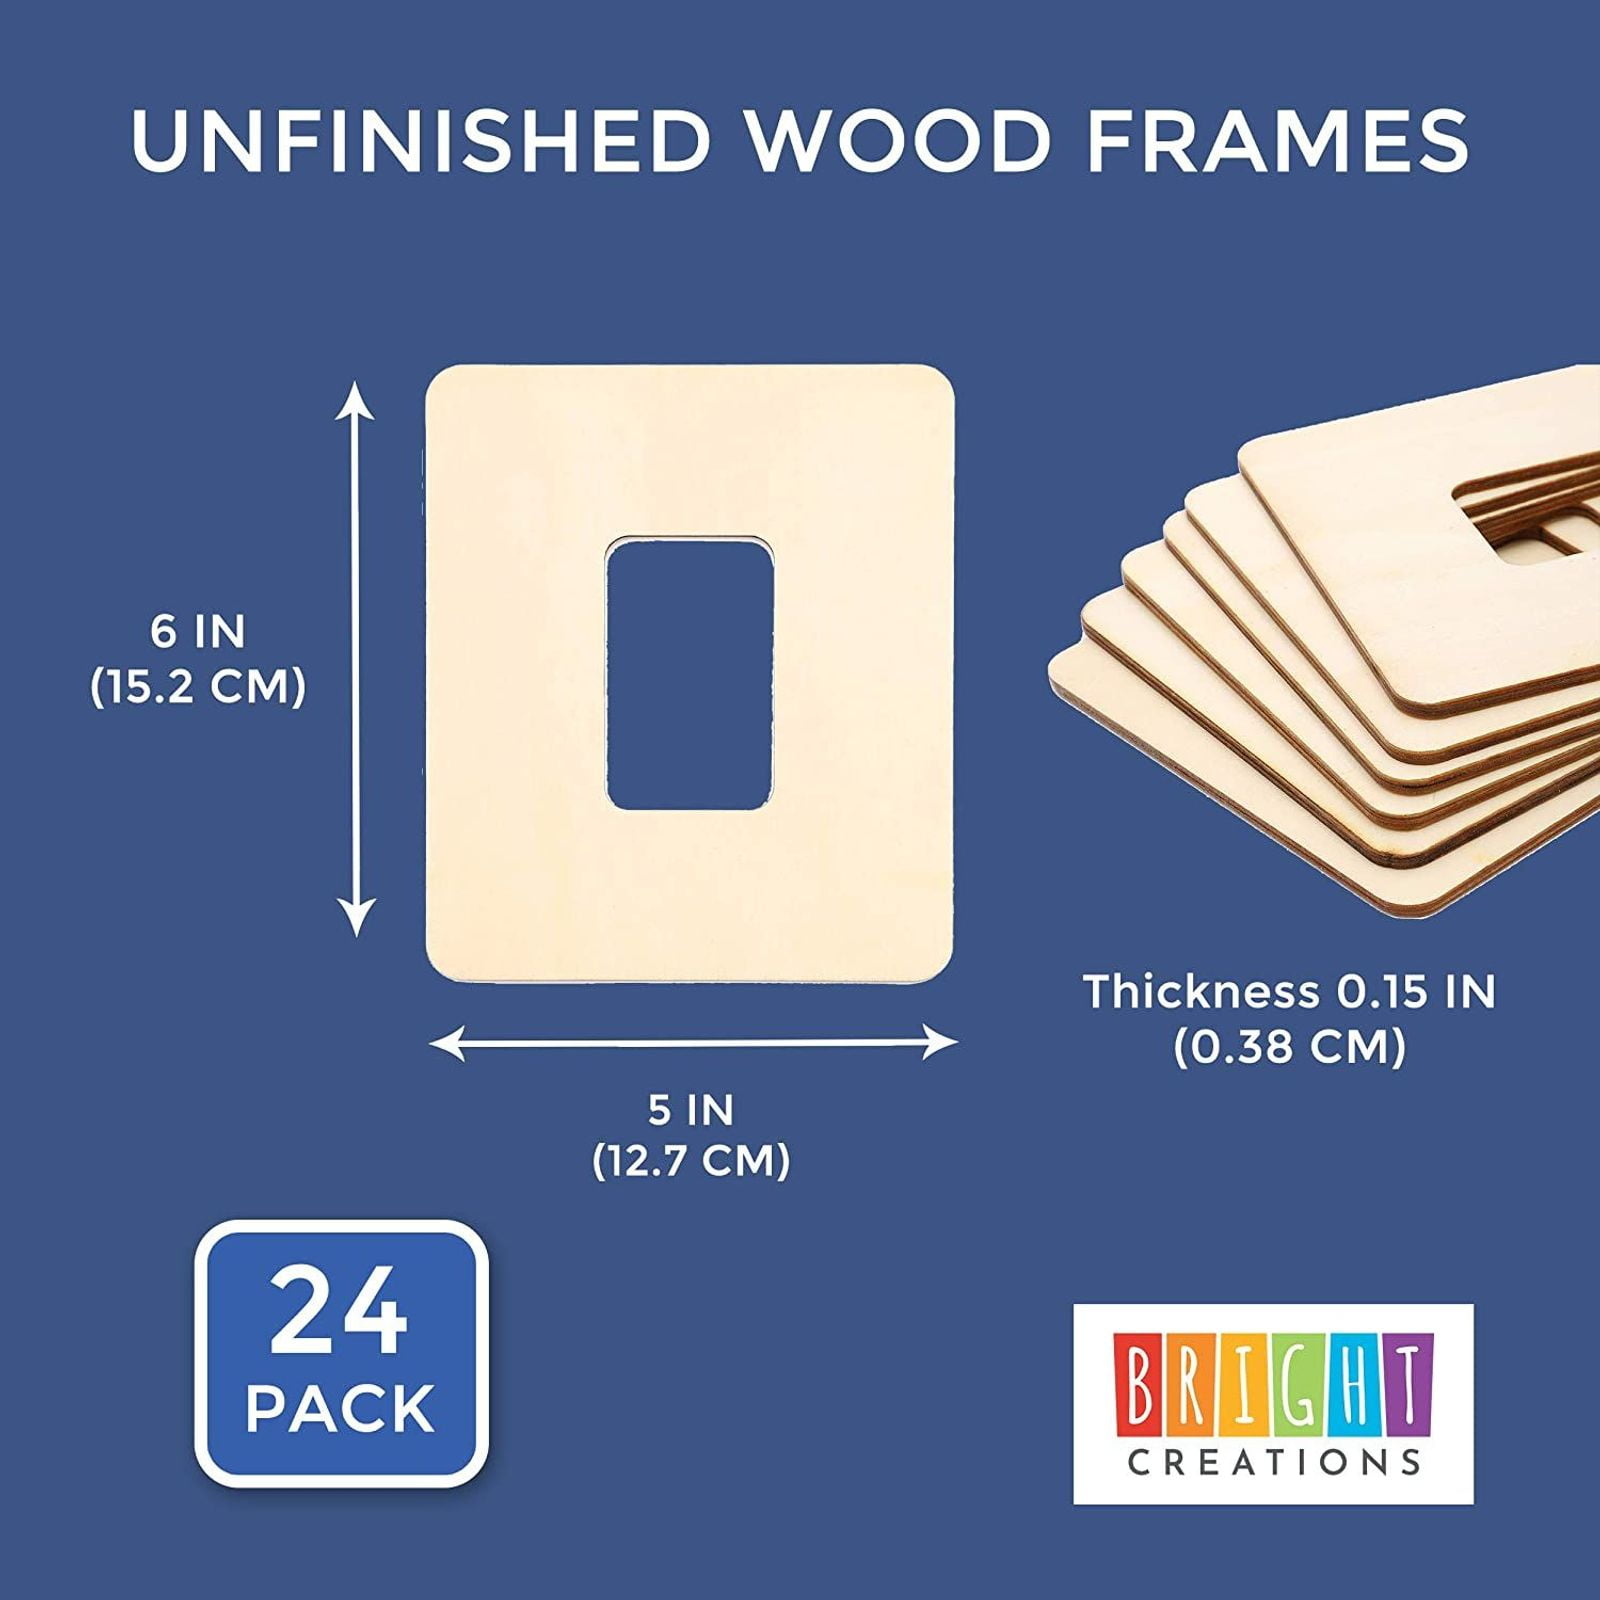 Unfinished Wood Frames - Paint Them in a Coordinating Color - Time For All  Things